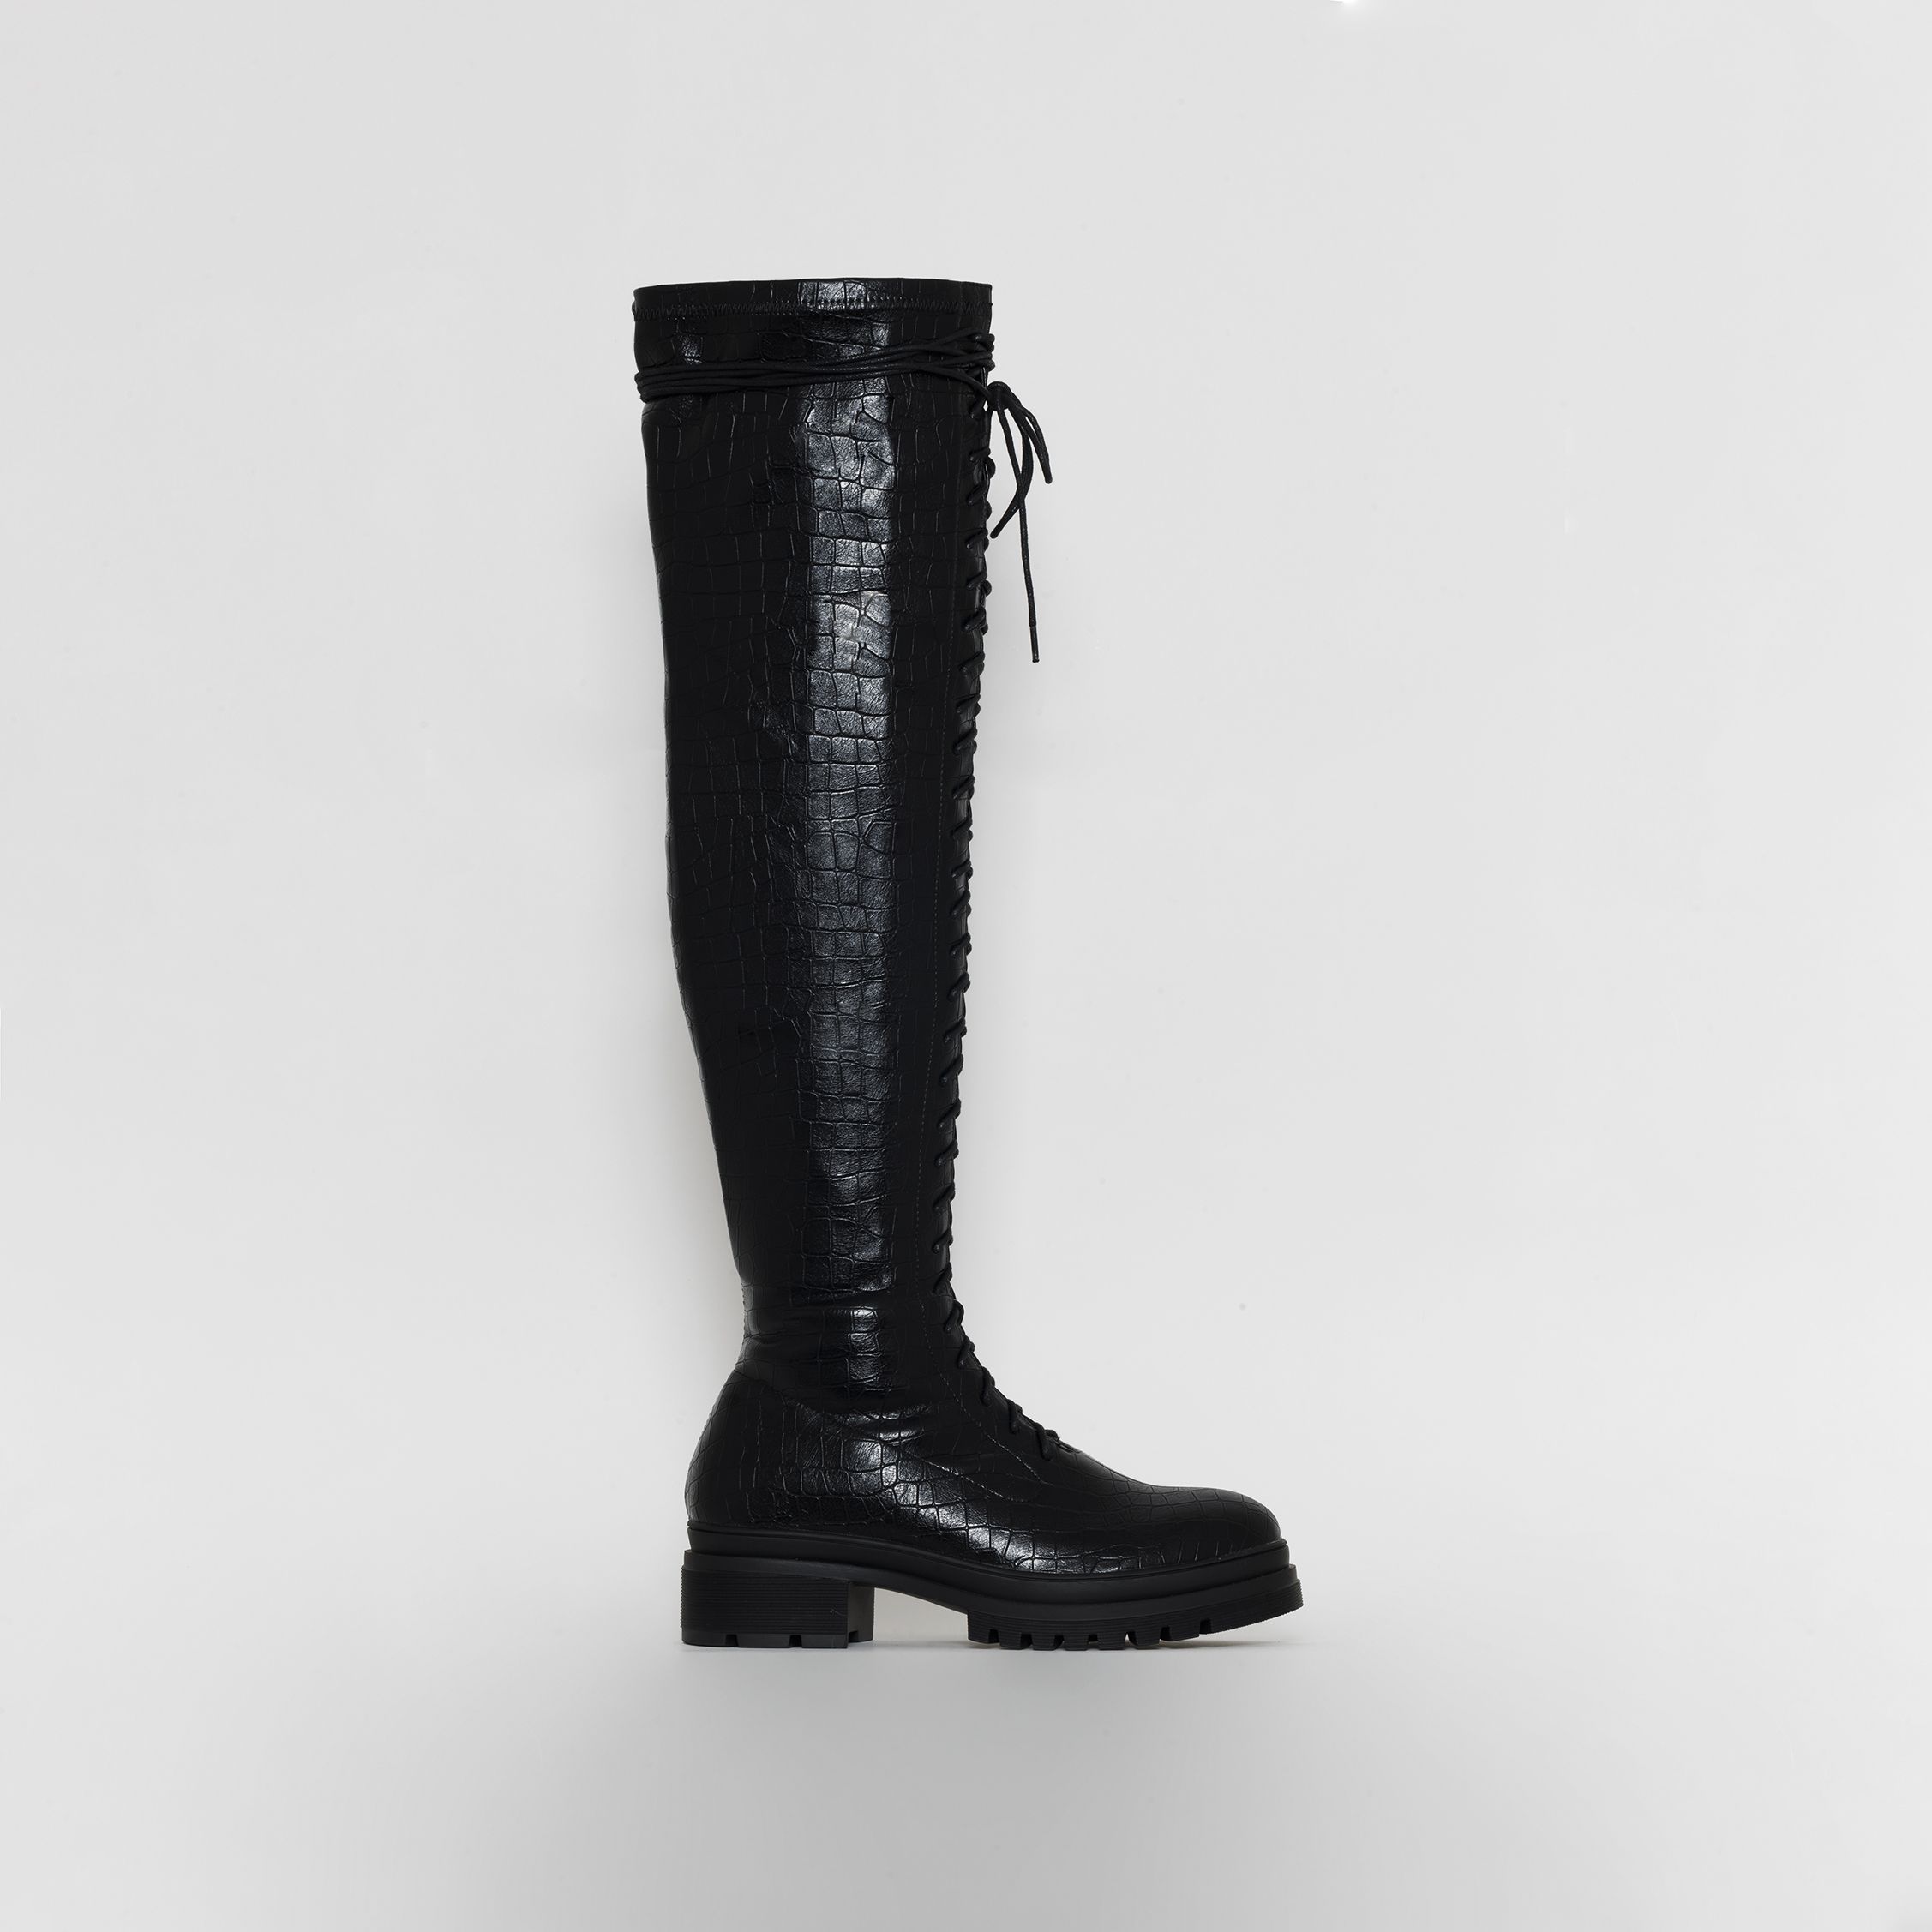 Cory Black Faux Croc Print Lace Up Over The Knee Boots